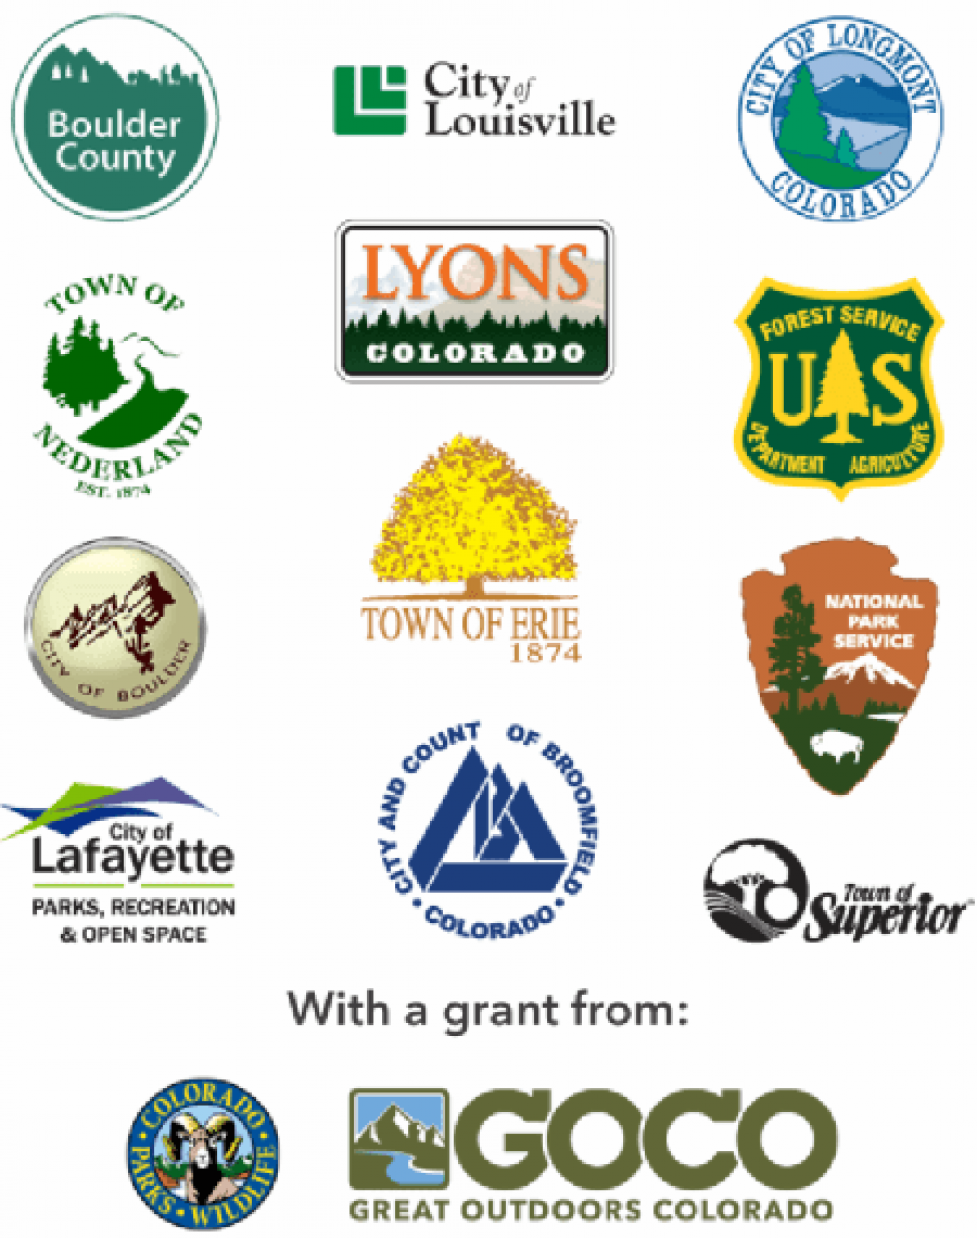 Partner Agencies: Boulder County, City and County of Broomfield, City of Boulder, City of Longmont, City of Lafayette, City of Louisville, Rocky Mountain National Park, Town of Superior, Town of Erie, Town of Lyons, Town of Nederland, USFS